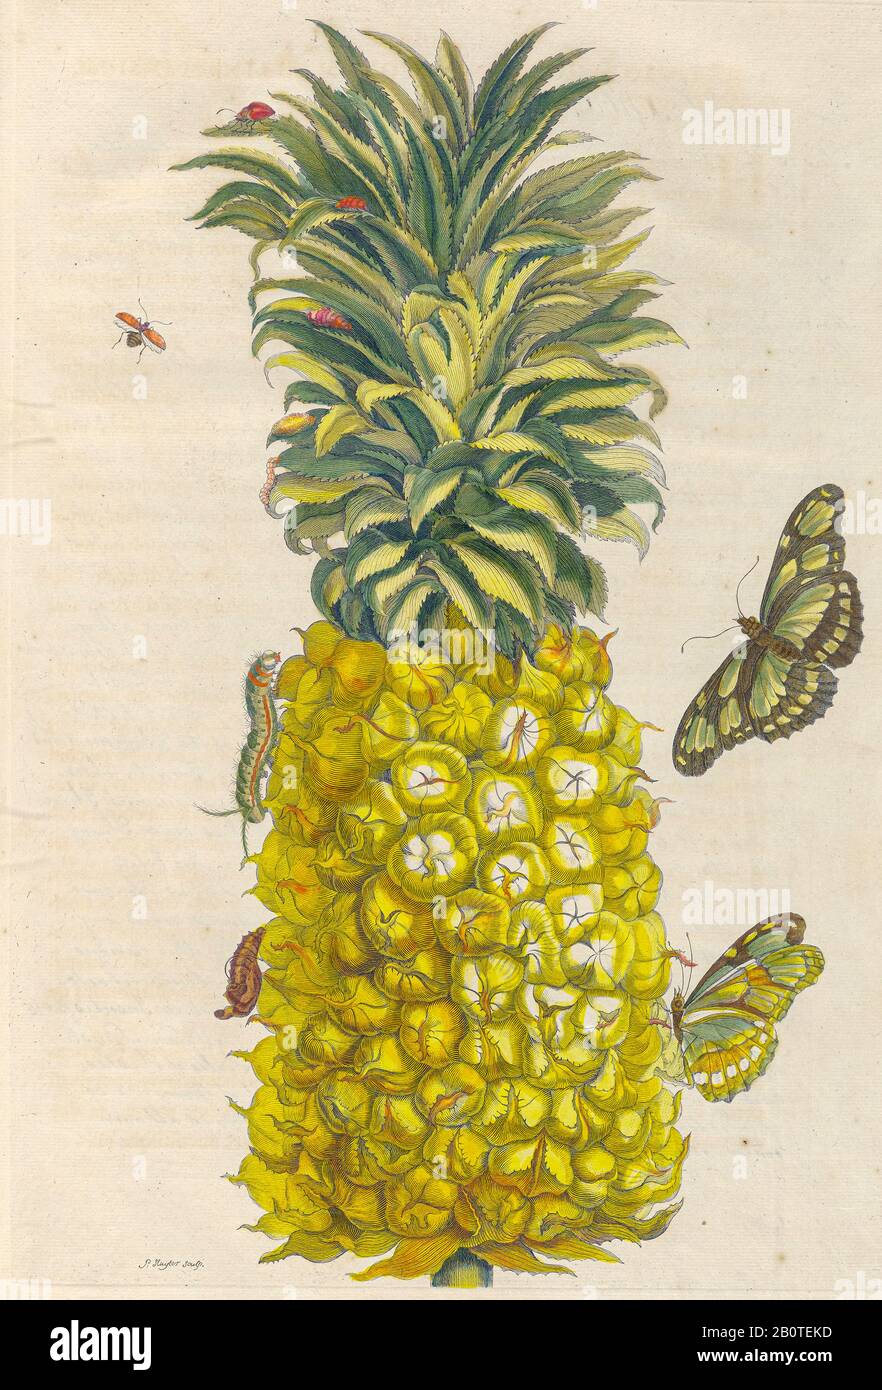 Pineapple and butterflies from Metamorphosis insectorum Surinamensium (Surinam insects) a hand coloured 18th century Book by Maria Sibylla Merian published in Amsterdam in 1719 Stock Photo